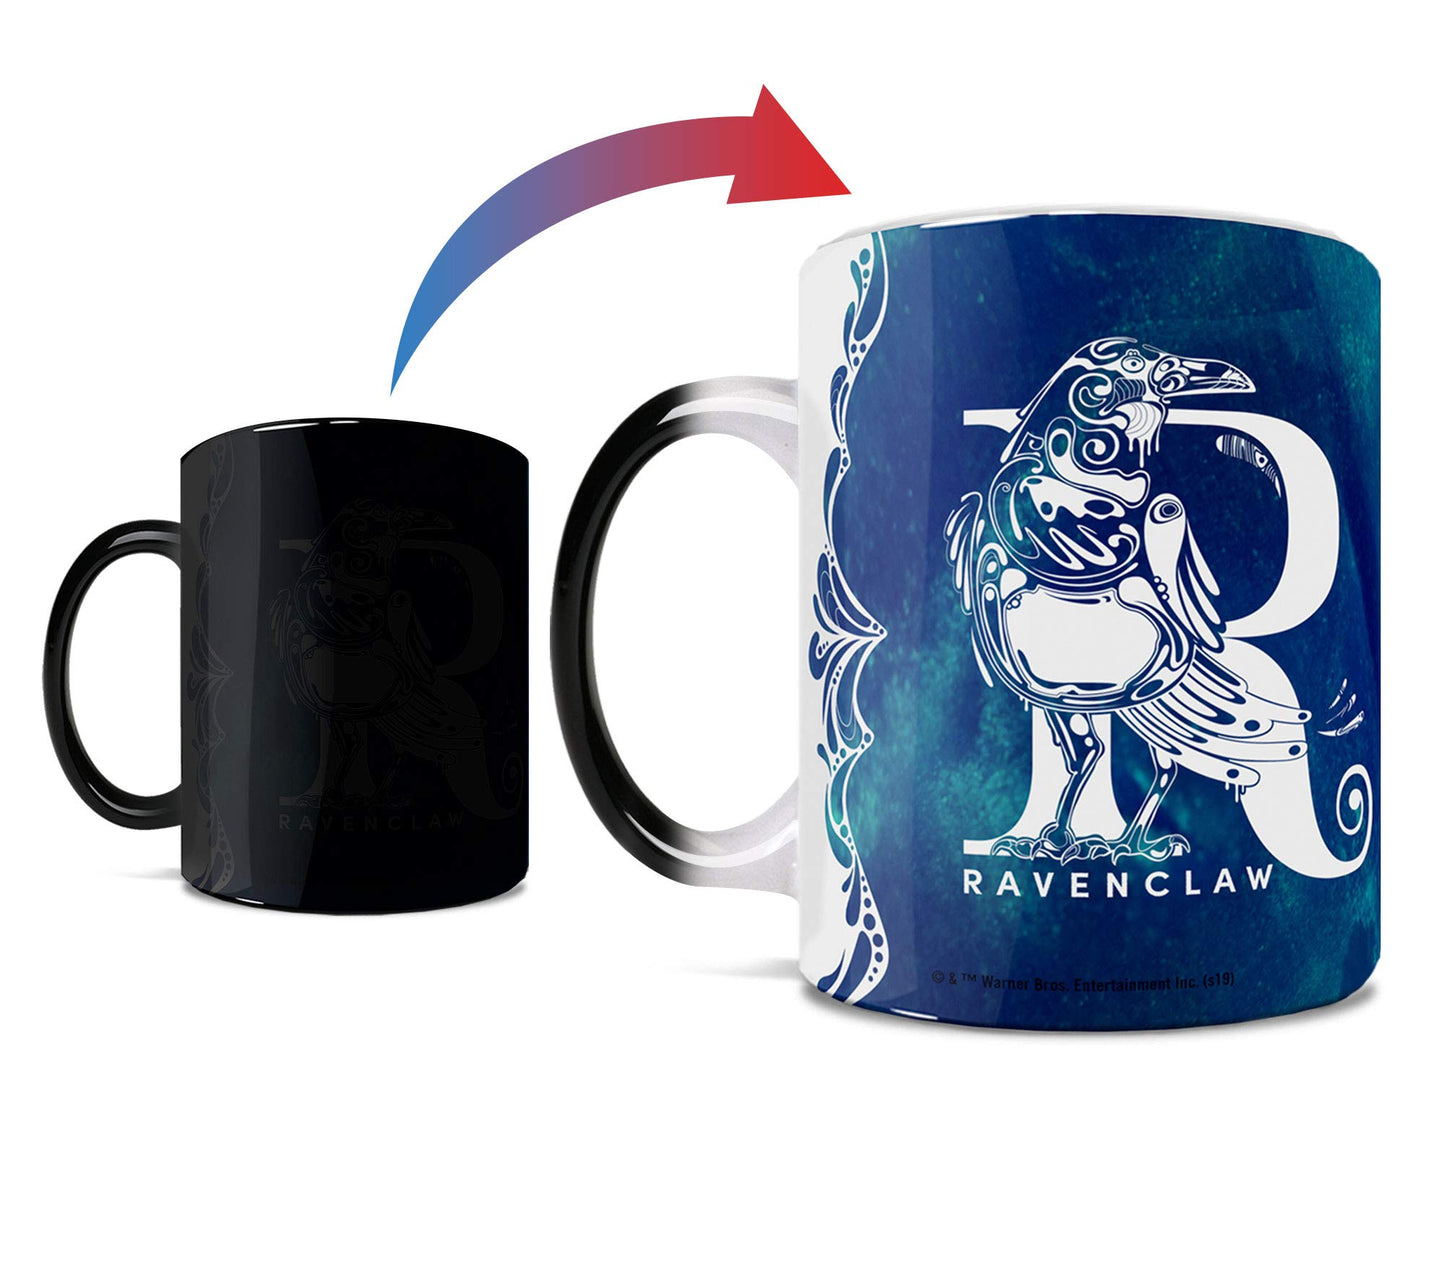 Harry Potter - Ravenclaw - Aguamenti - One 11 oz Morphing Mugs Color Changing Heat Sensitive Ceramic Mug – Image Revealed When HOT Liquid Is Added!